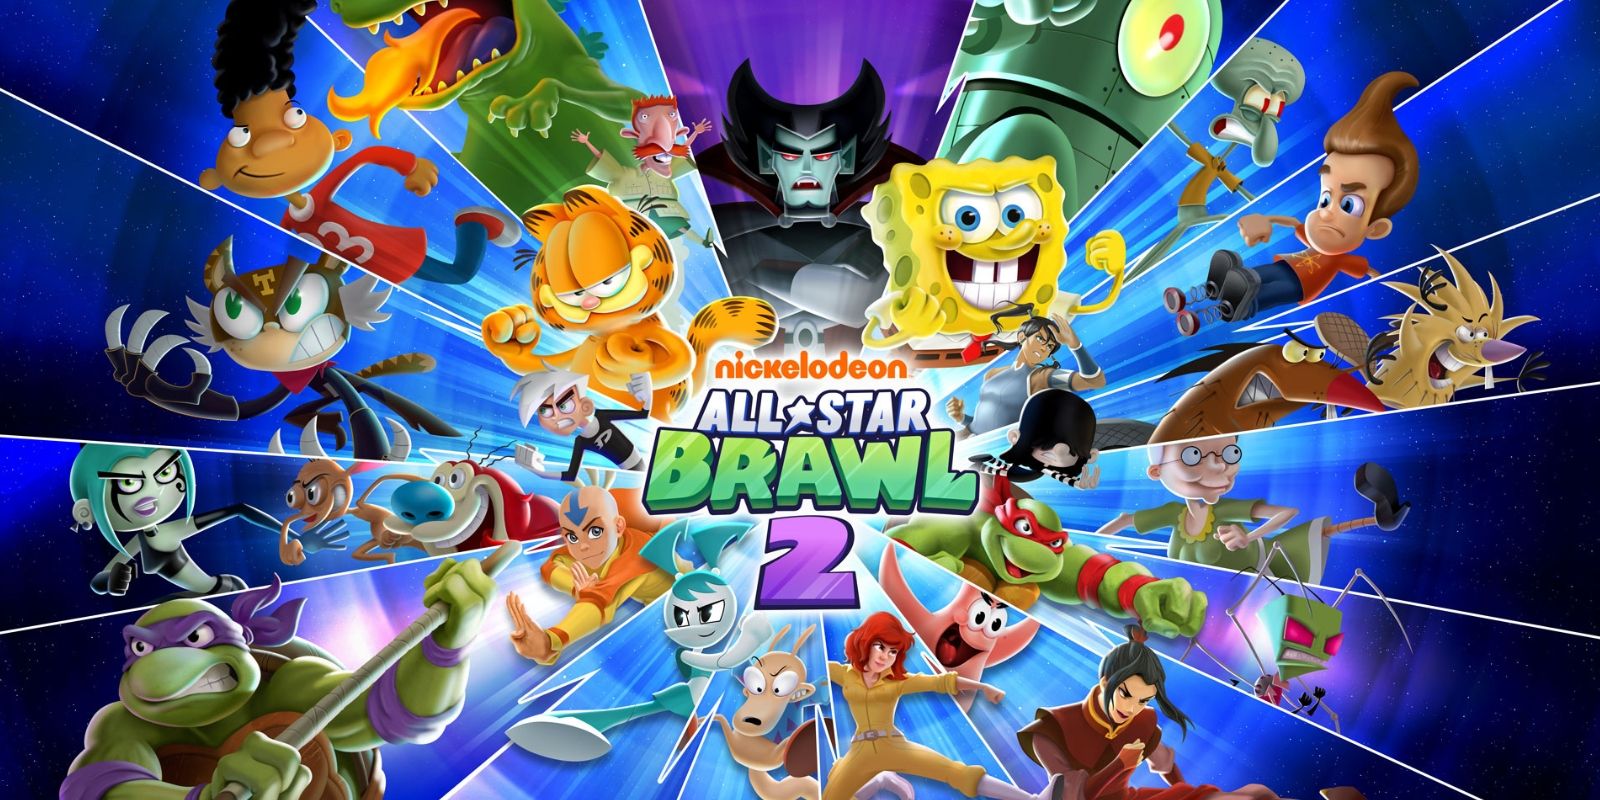 Dose anyone know where I can get the brawl star plushies thanks